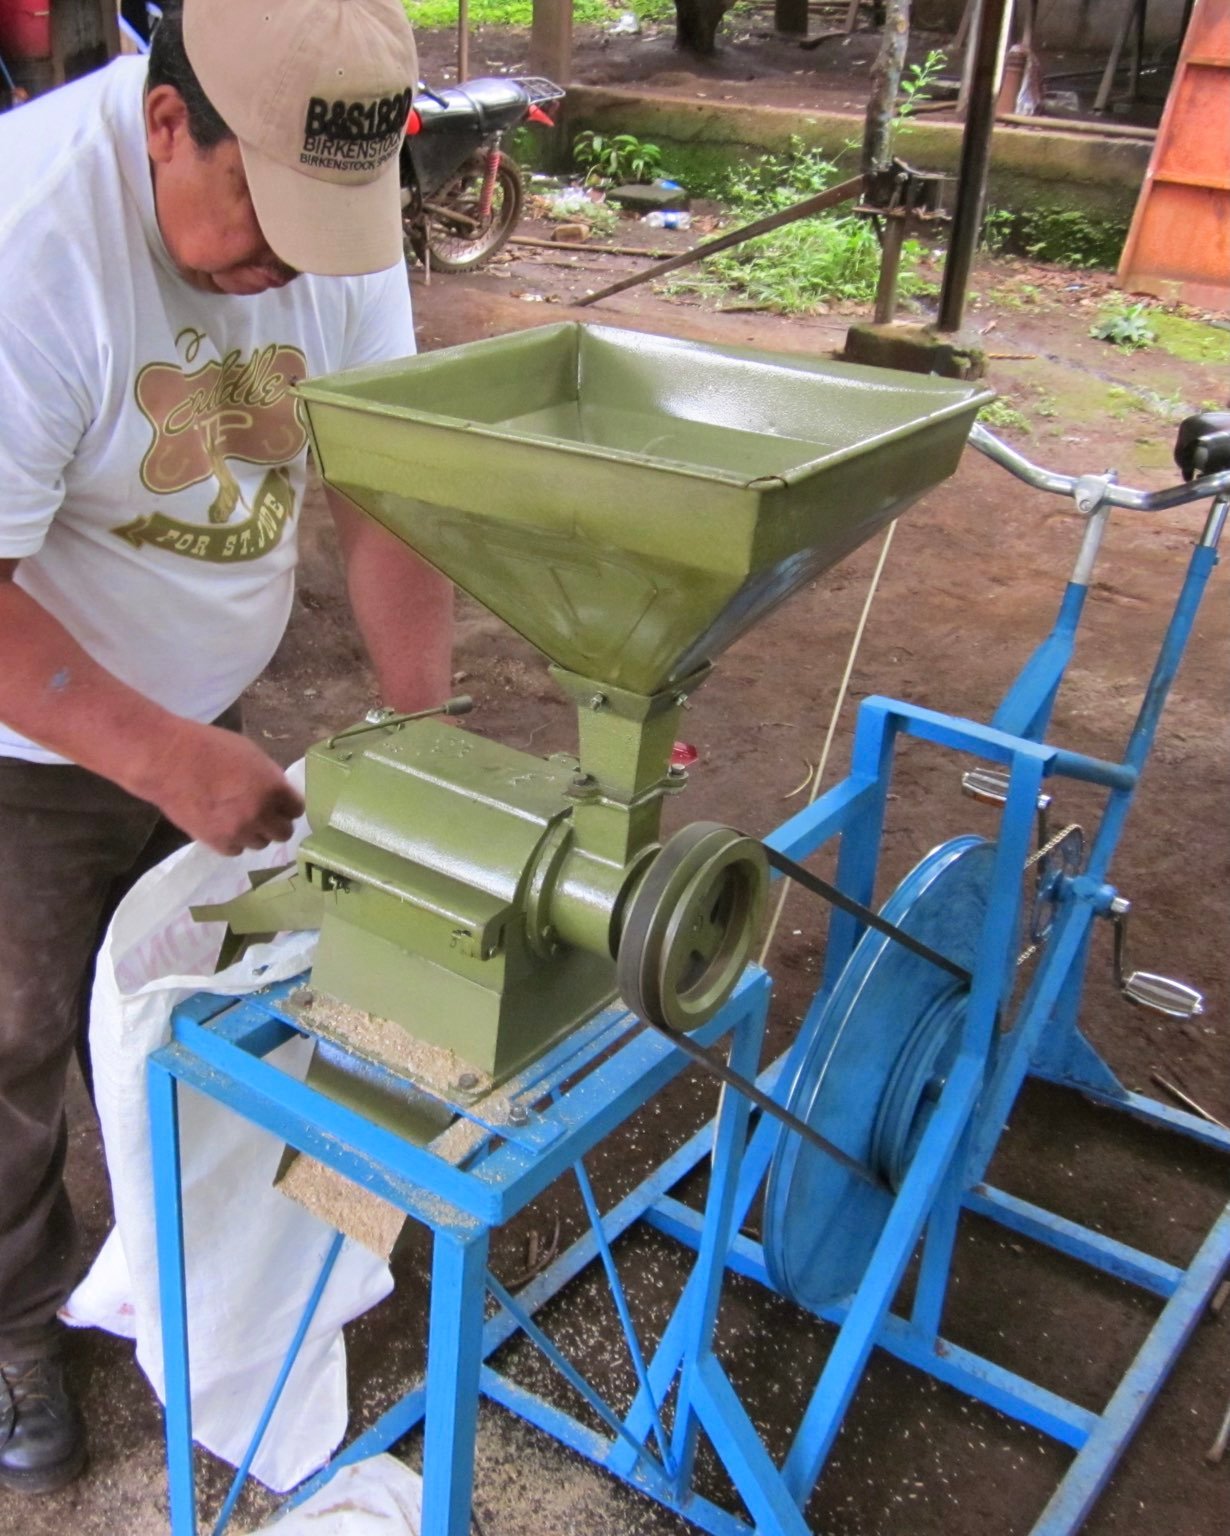 The fully assembled machine, painted blue with a green dehuller mounted. A belt connects the flywheel to the dehuller.